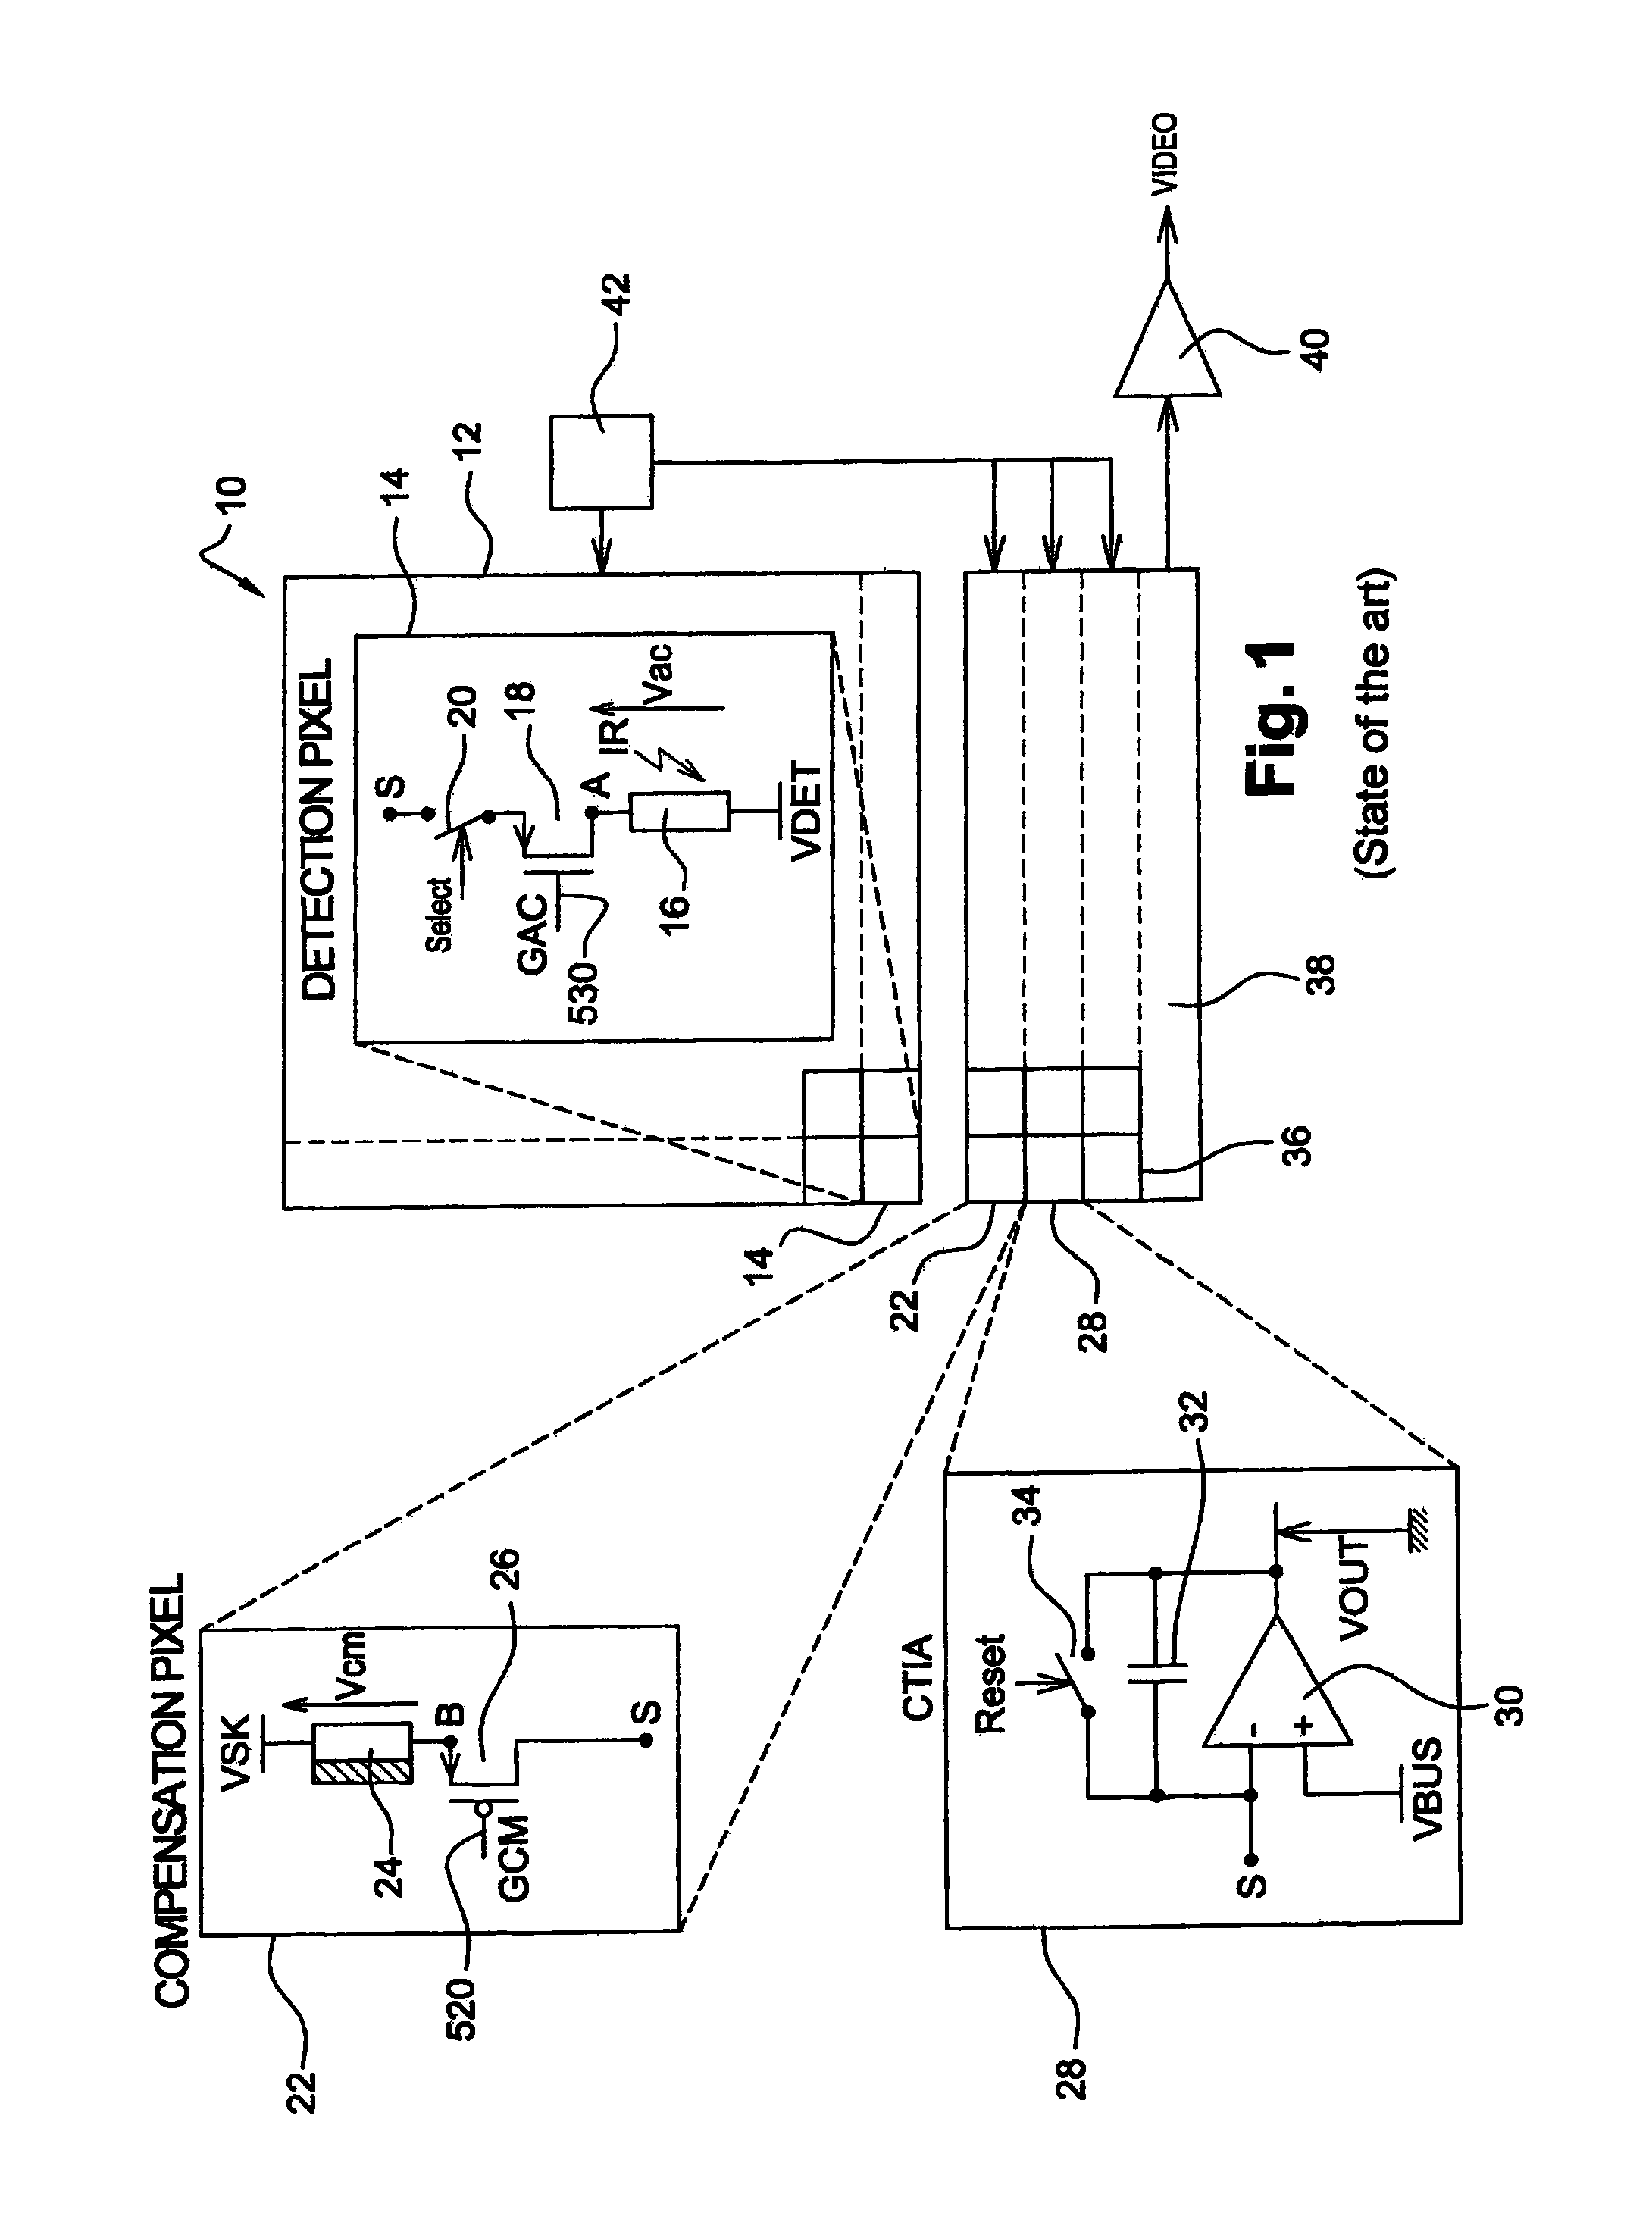 Bolometric Detector With A Temperature-Adaptive Biasing